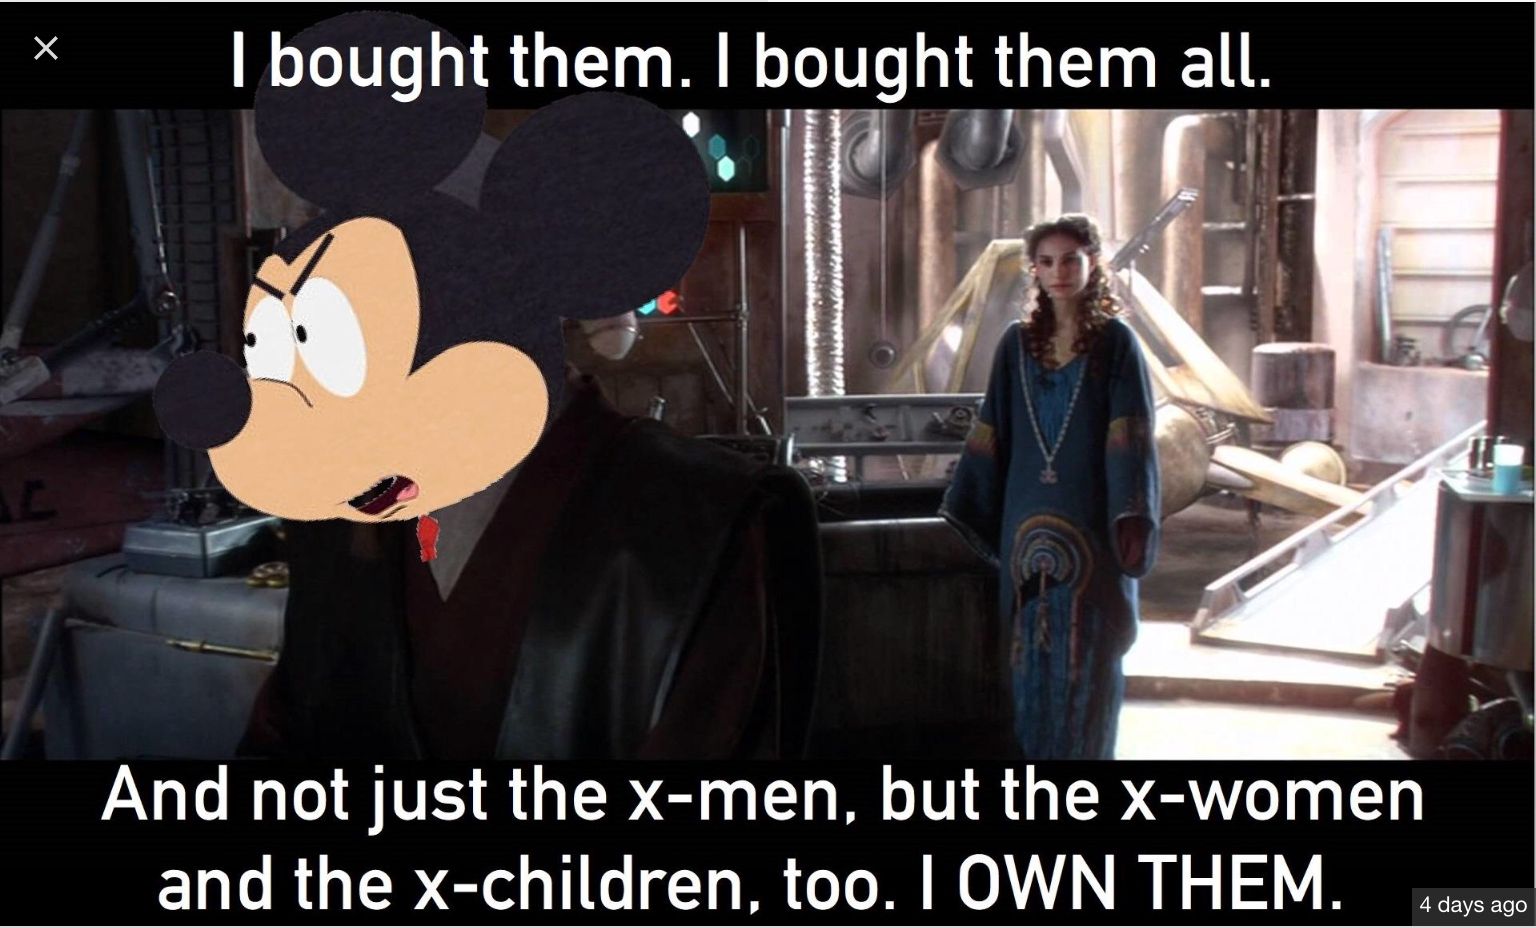 Star Wars Mickey Mouse Buys the X-Men